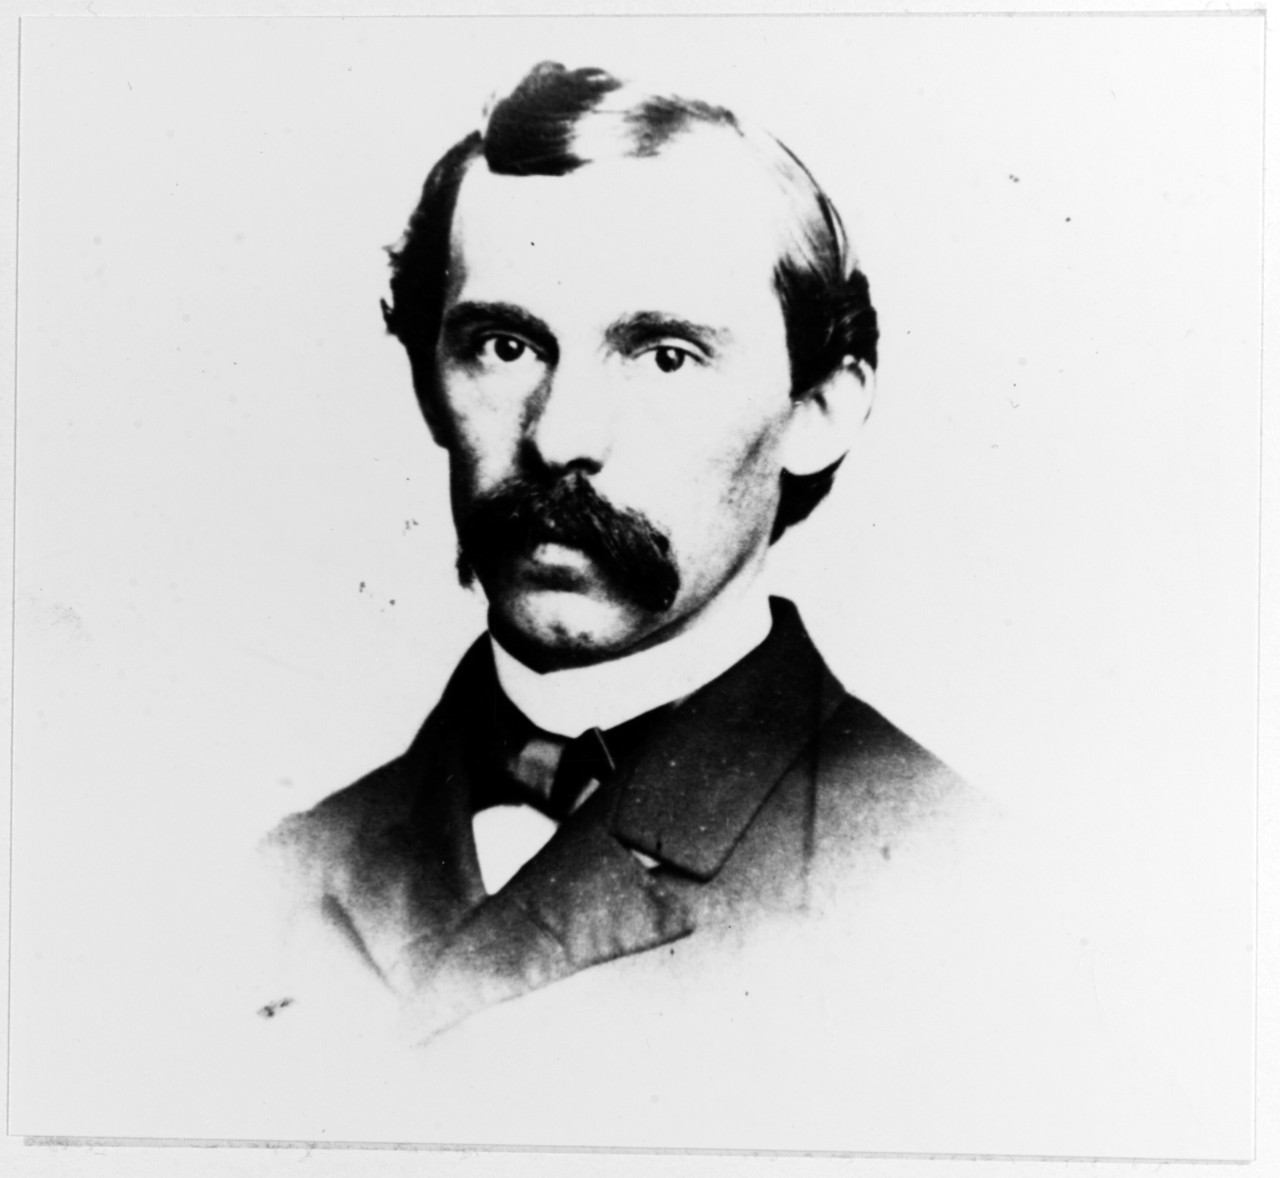 First Assistant Engineer Jameson C. Hull, USN